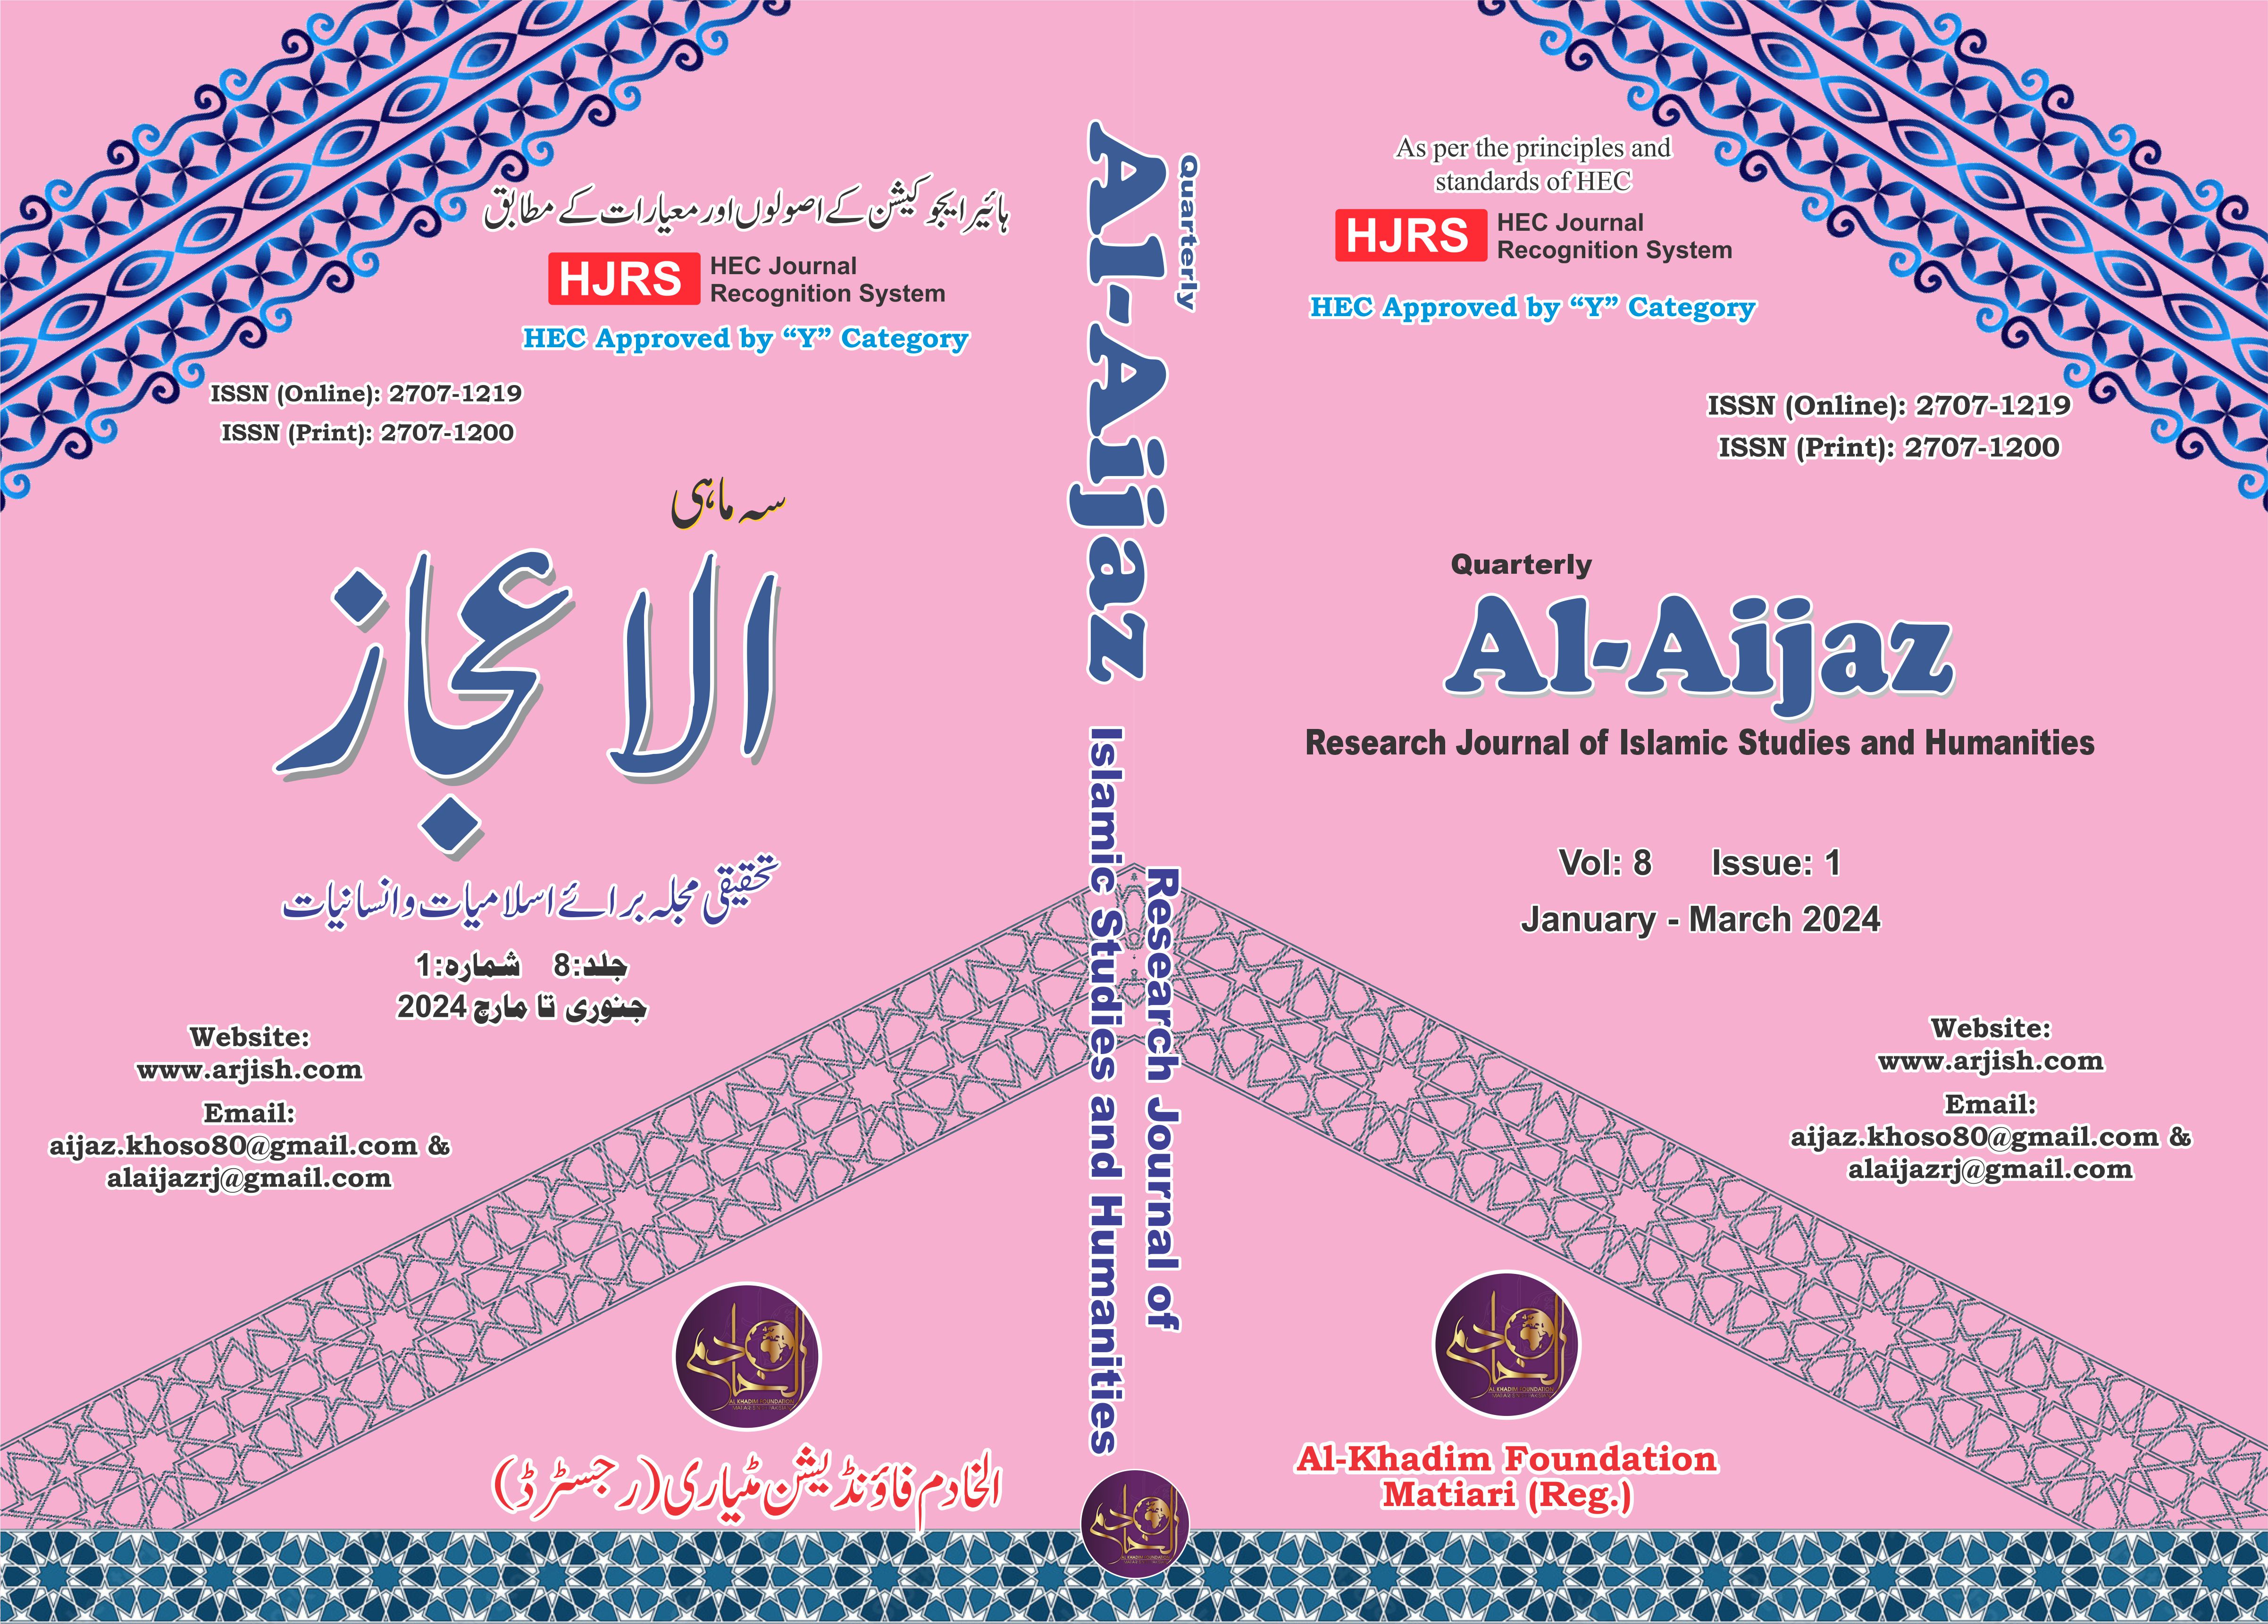 					View Vol. 8 No. 1 (2024): Al-Aijaz Research Journal of Islamic Studies & Humanities (January to March 2024)
				